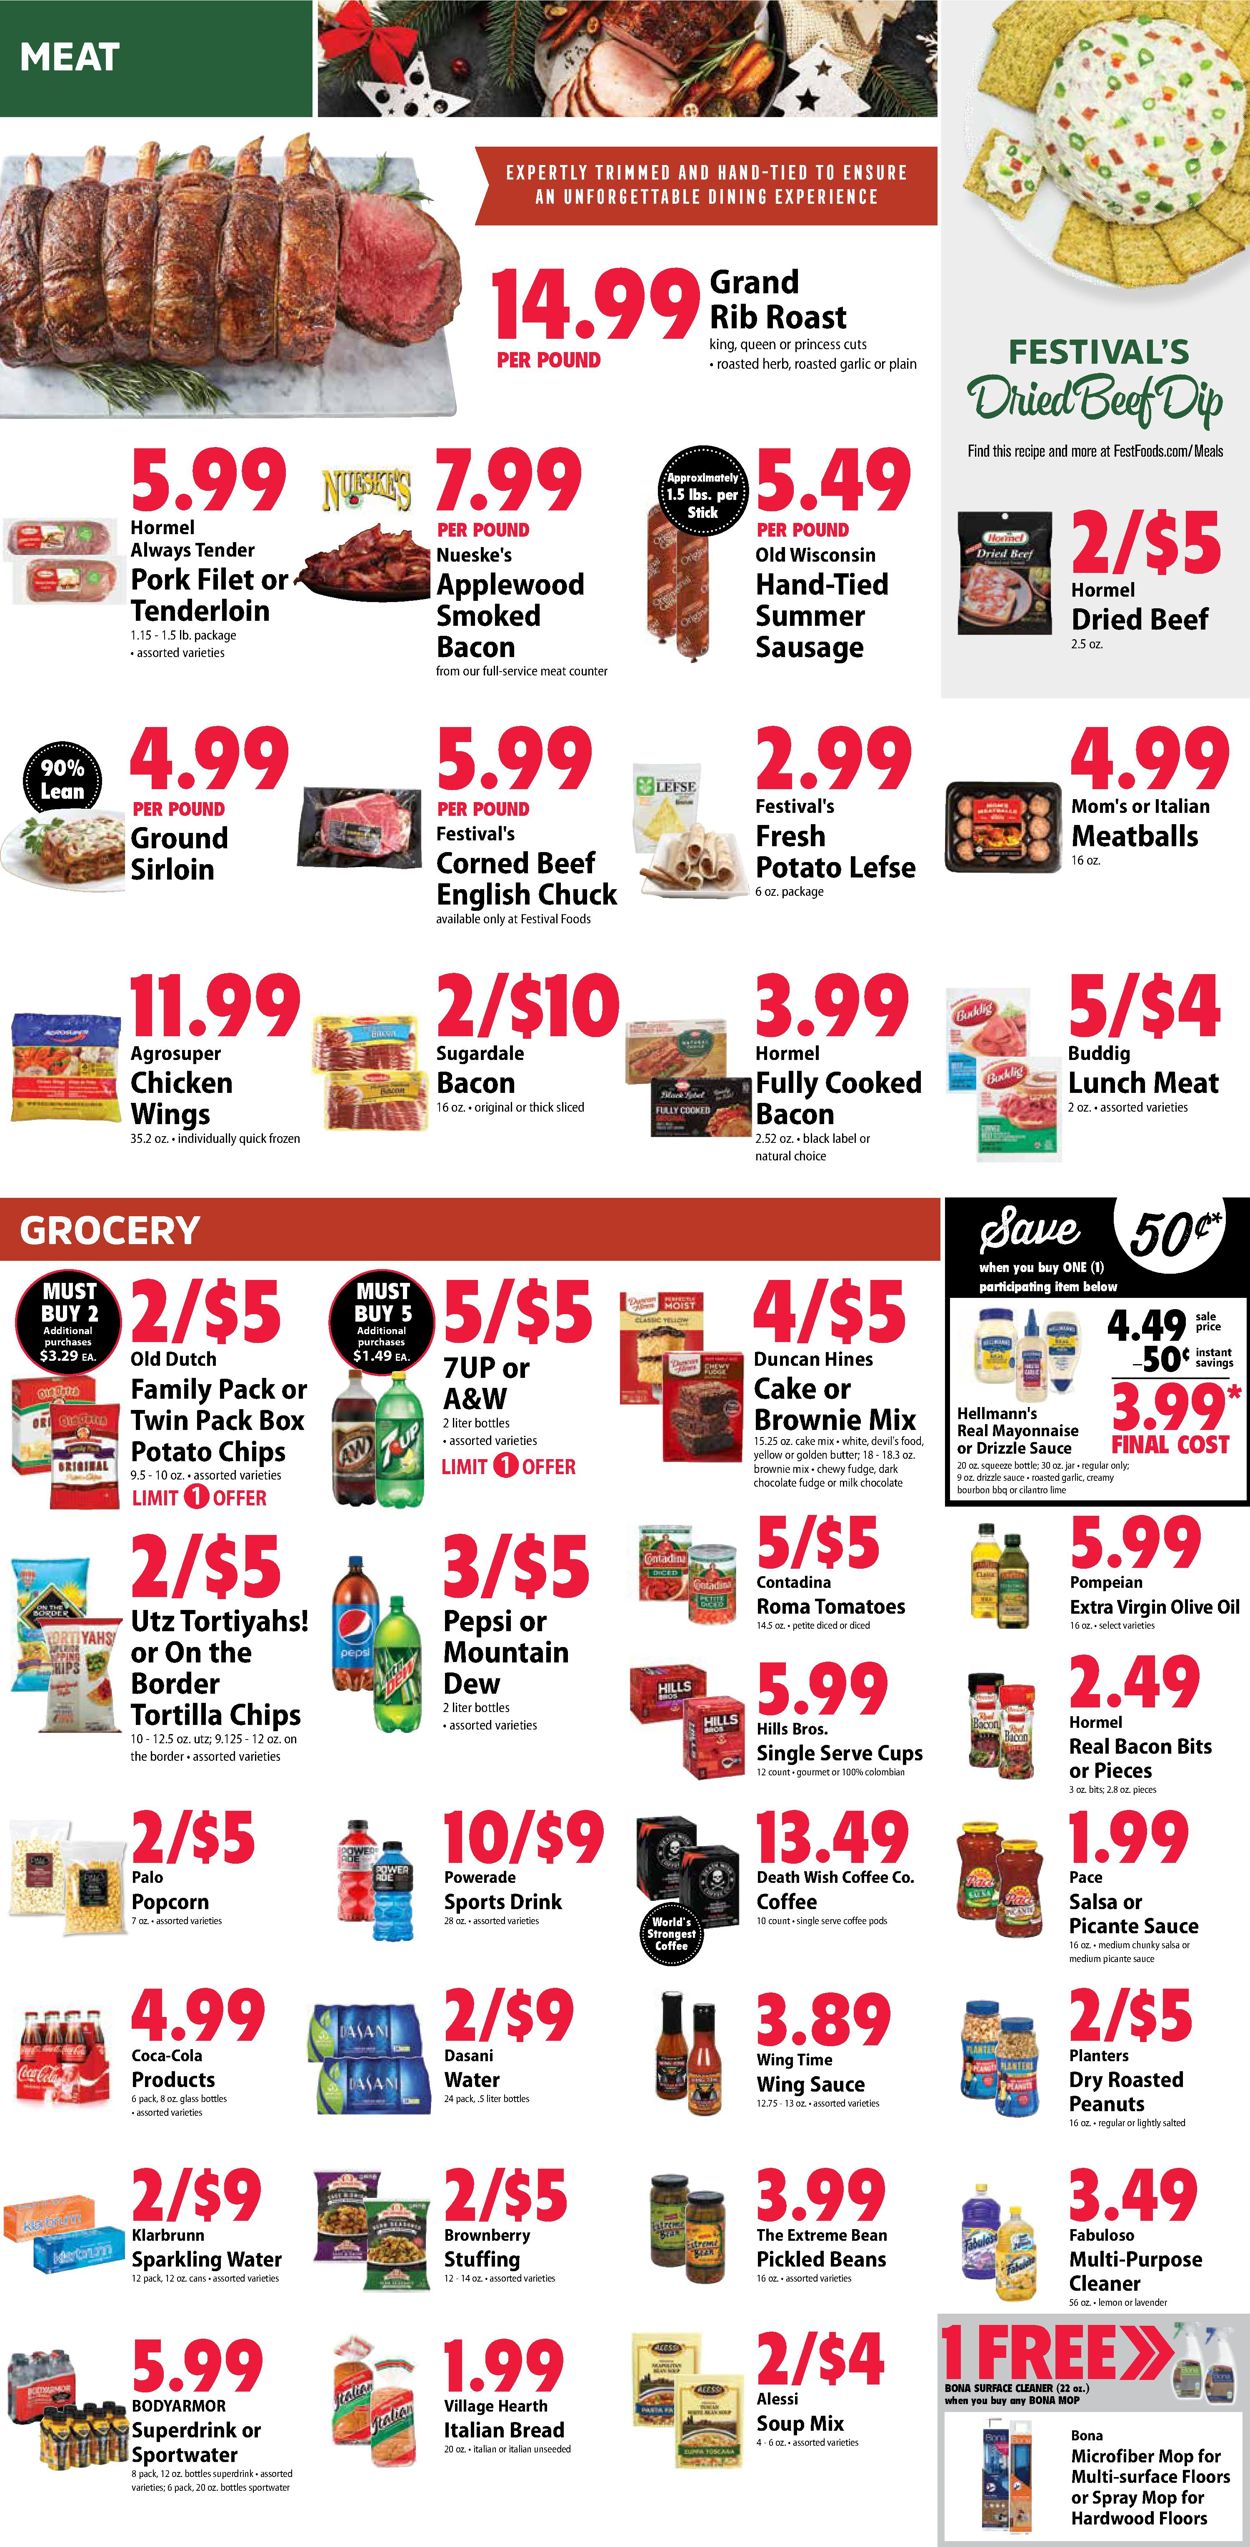 Festival Foods HOLIDAY 2021 Weekly Ad Circular - valid 12/22-12/28/2021 (Page 2)